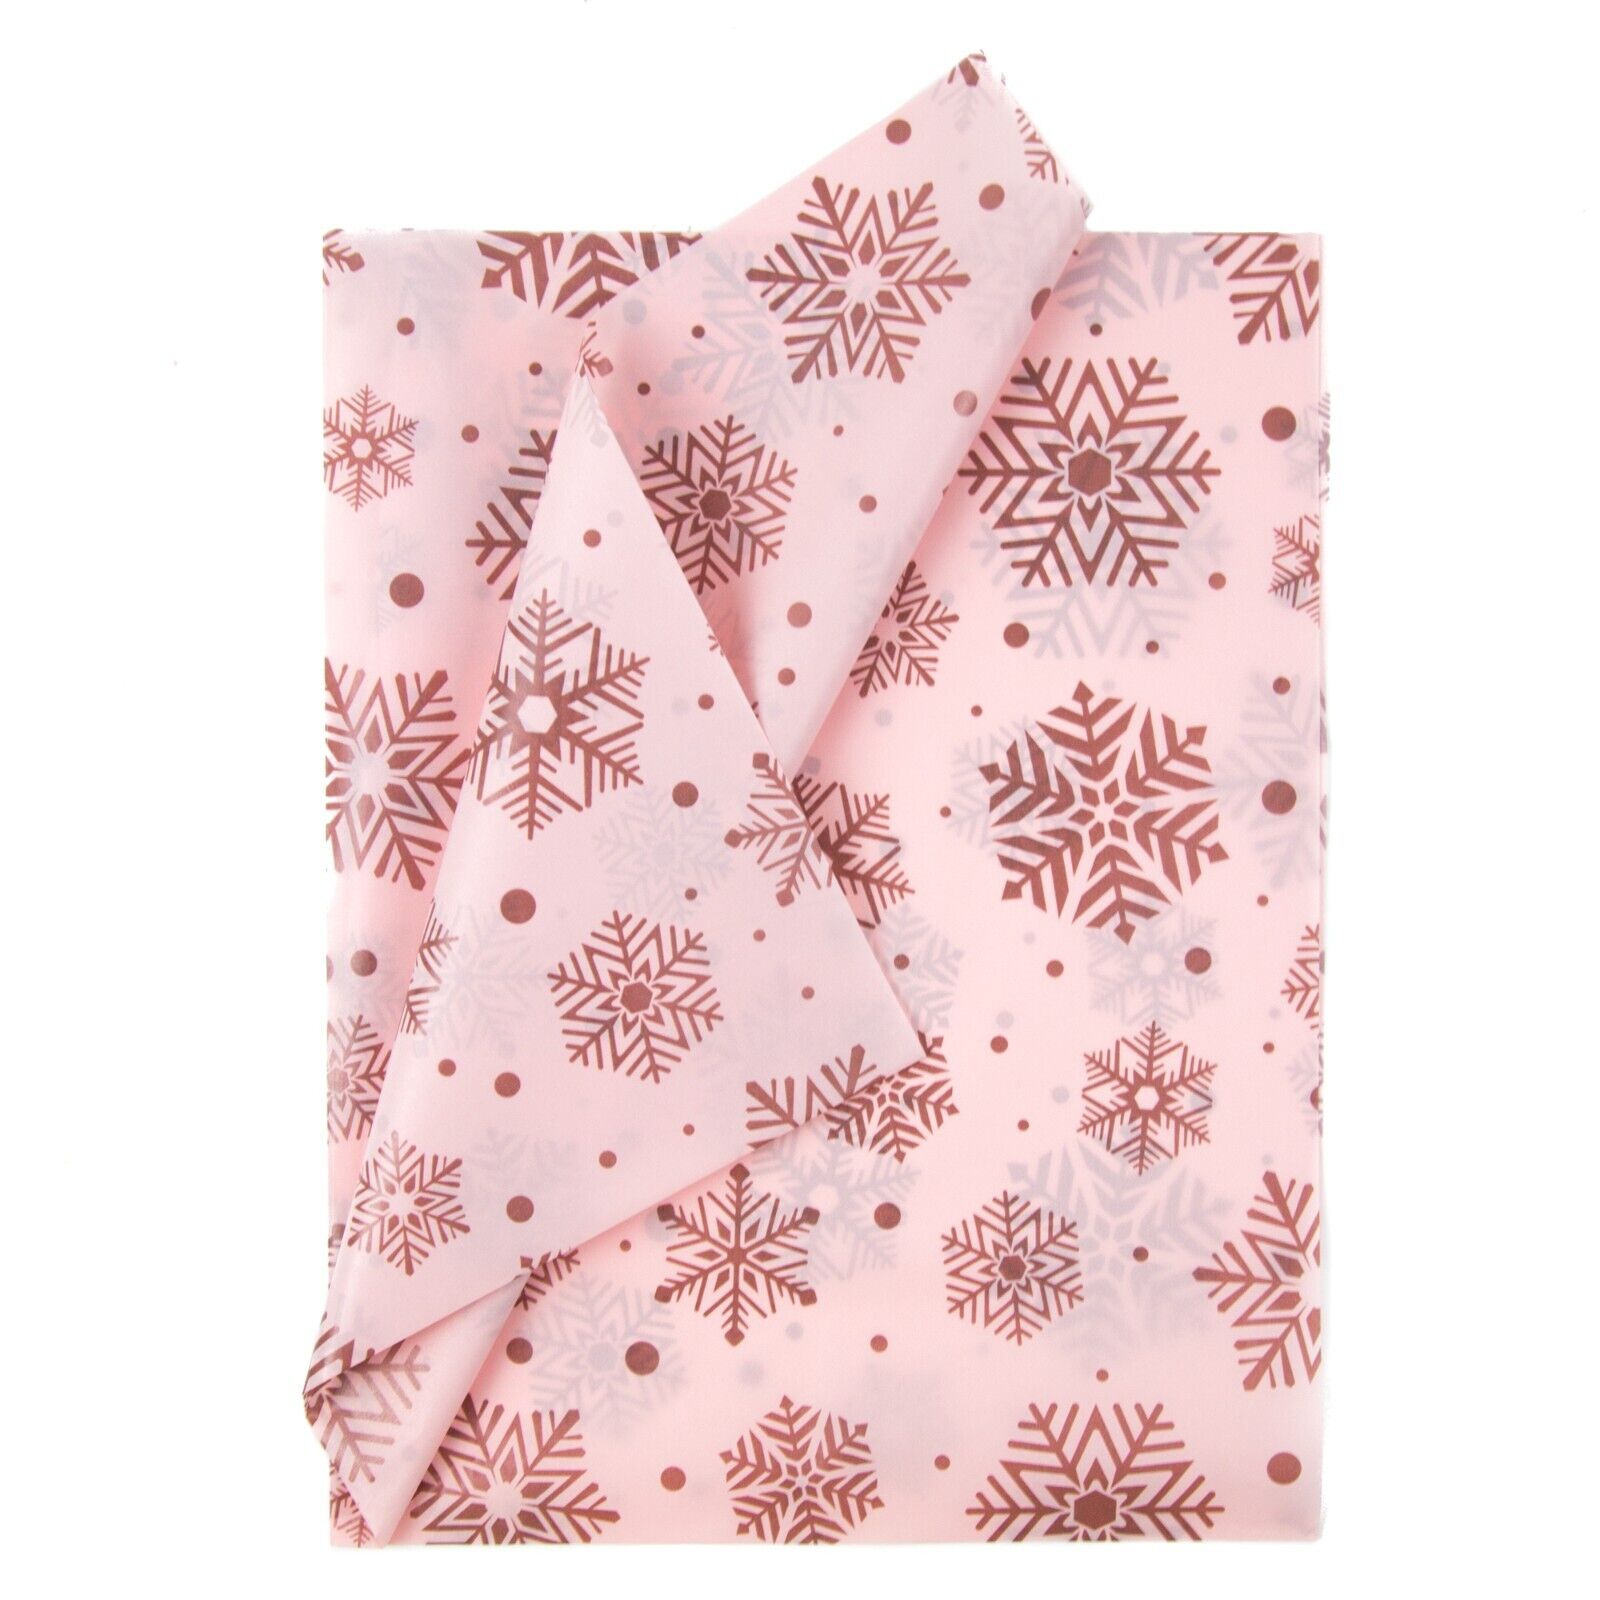 Tissue Paper - Rose Gold Snowflakes - 100 Sheets